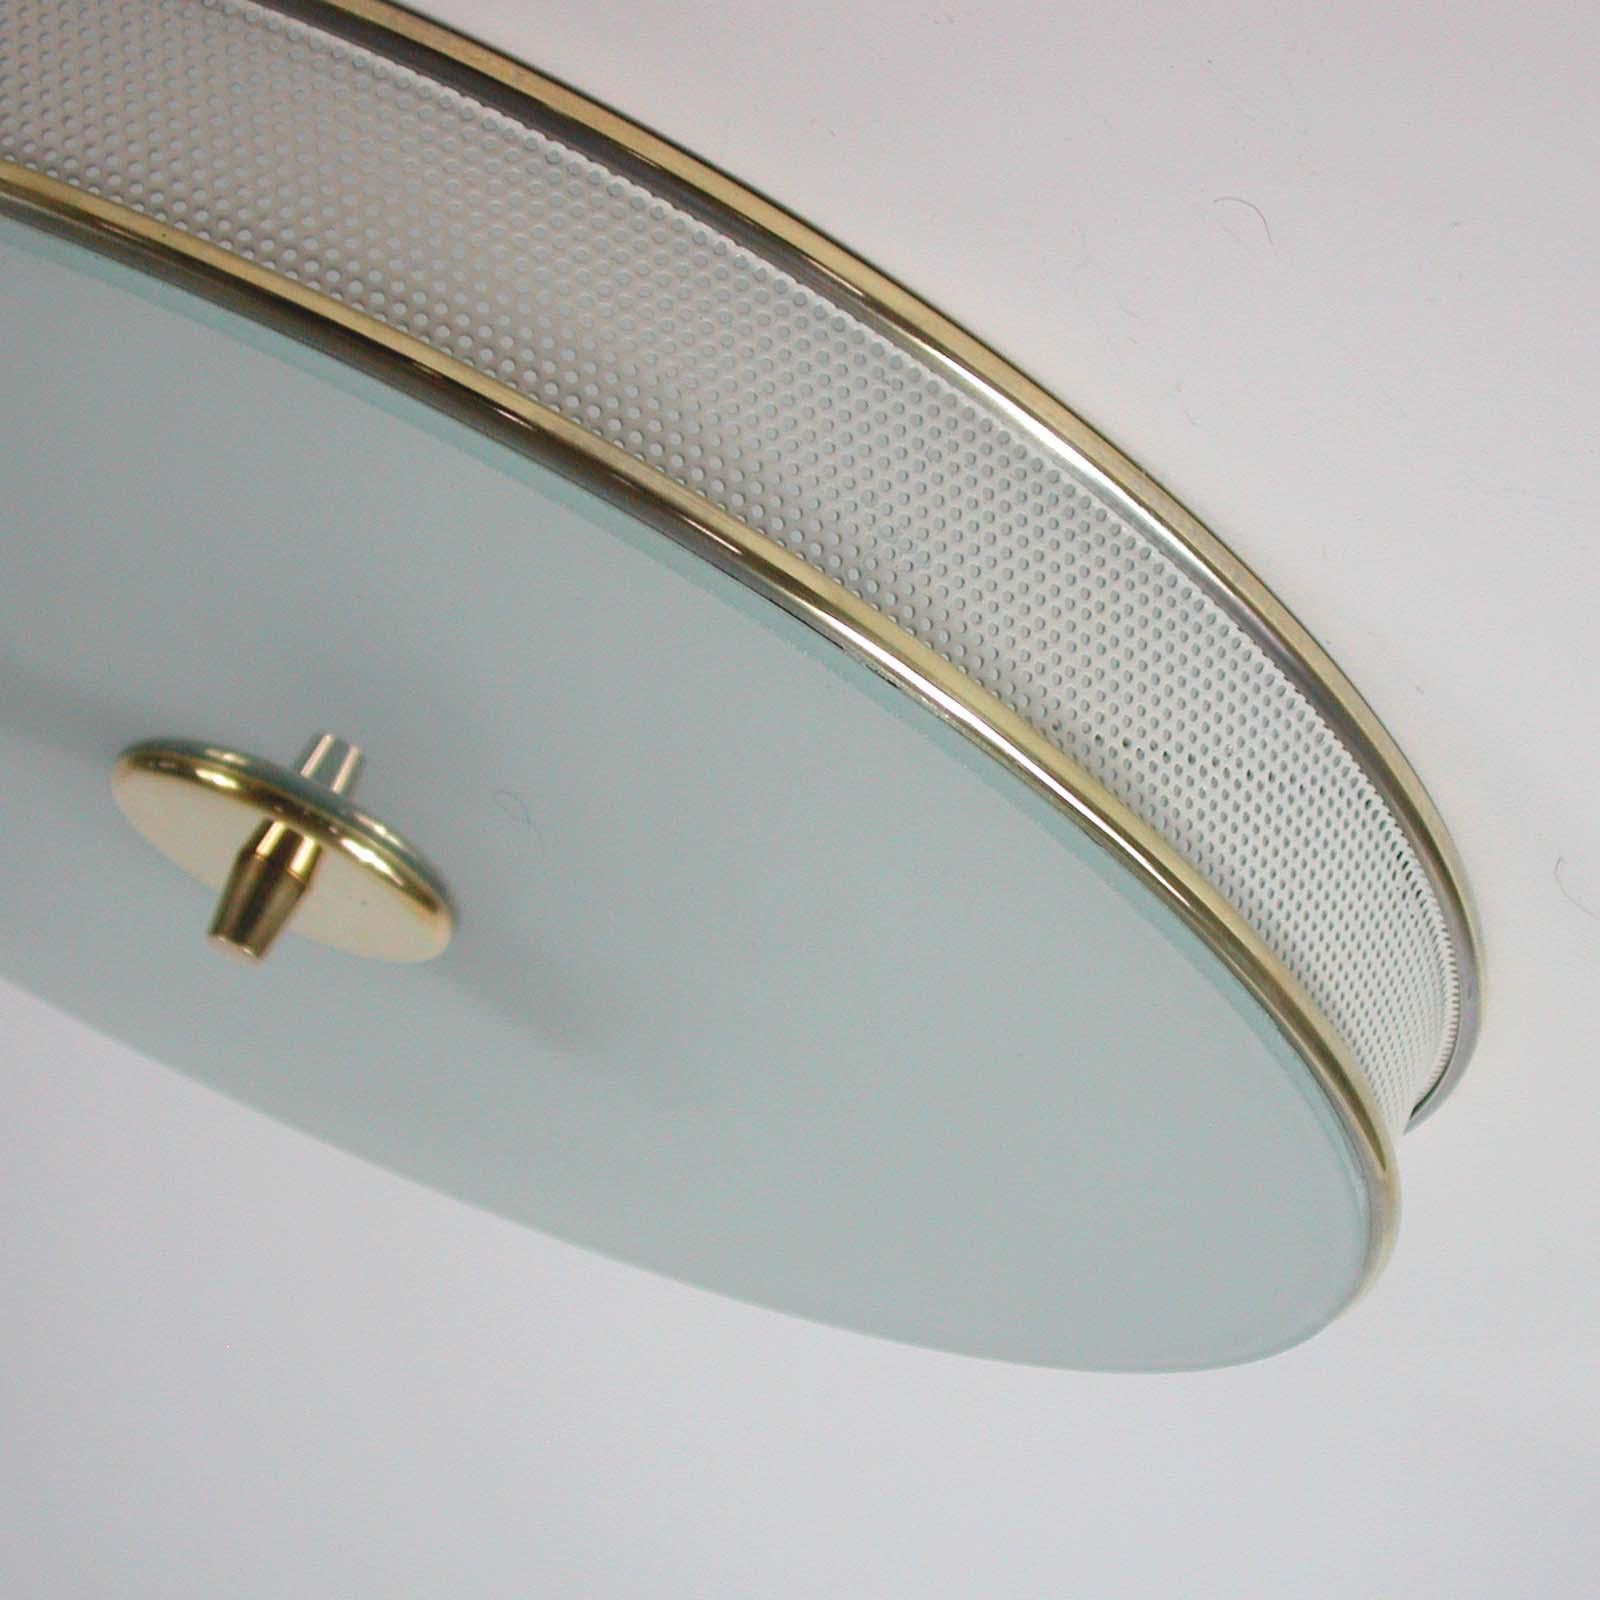 French Midcentury Cream White and Brass Mategot Style Flush Mount, 1950s For Sale 3